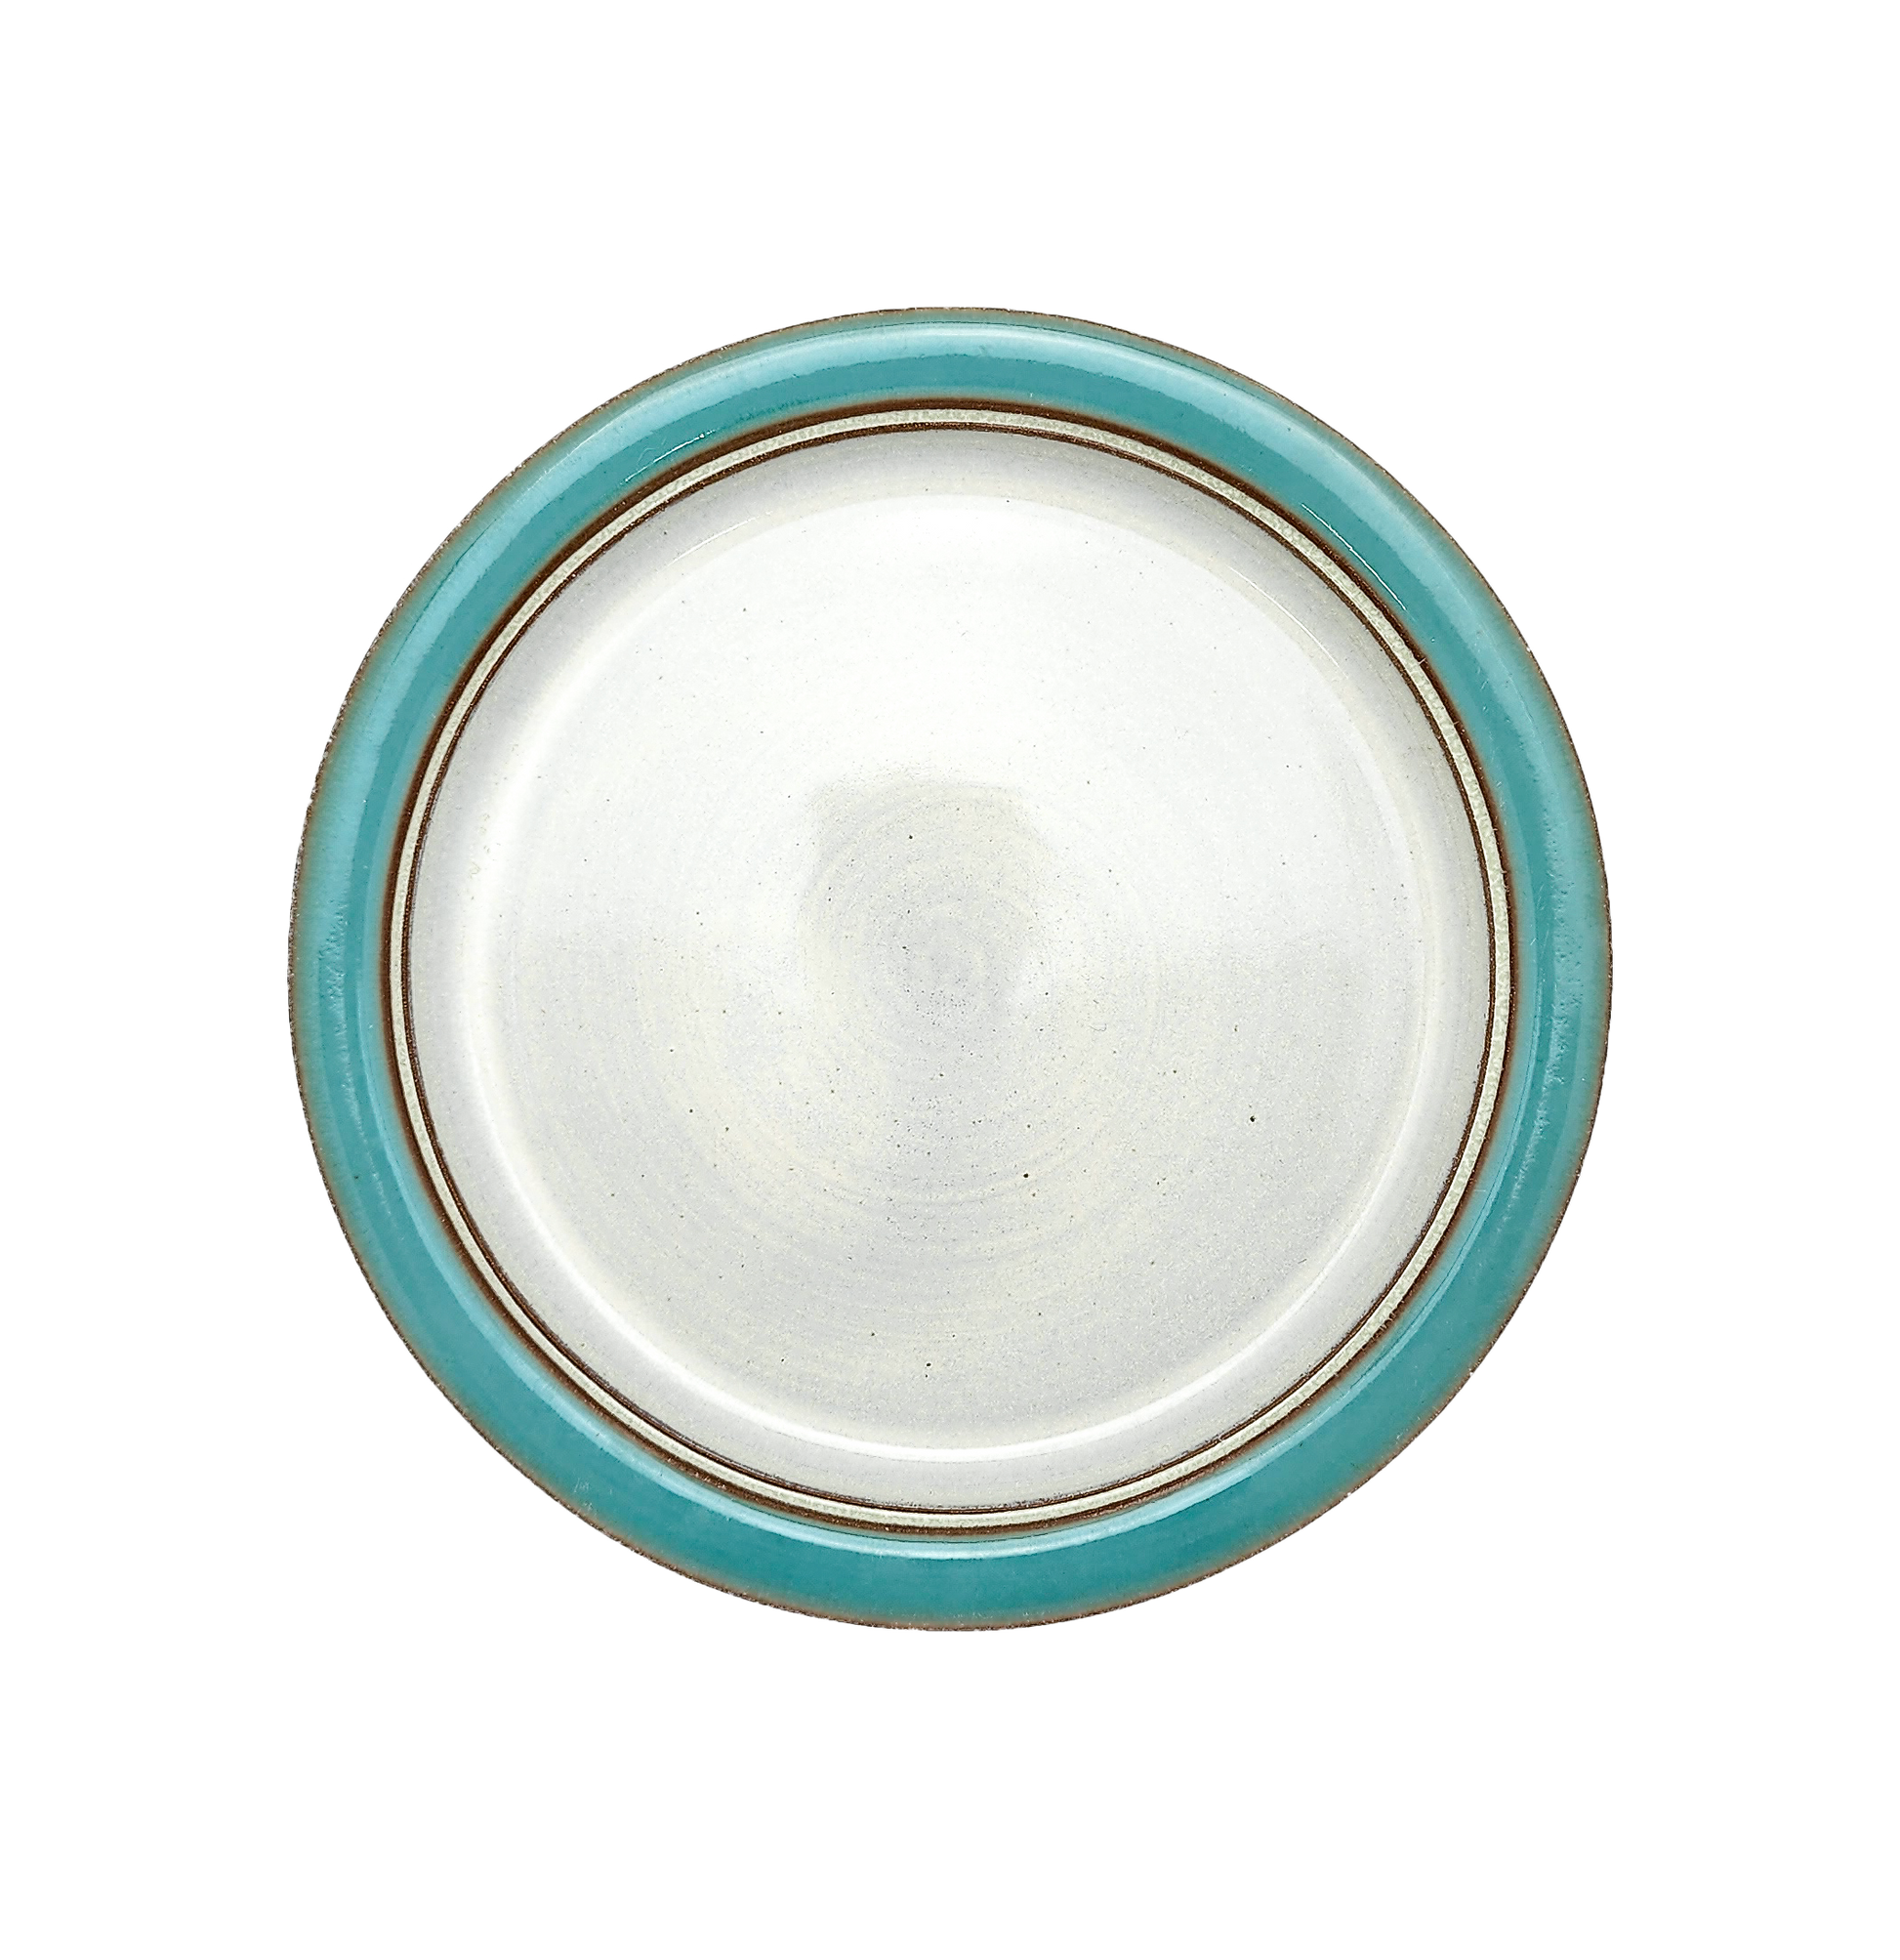 Image Description for Dinner Plate (10") in Sky Blue: A dinner plate from Clinton Pottery's Handmade Dinnerware Collection, featuring a serene and vibrant "Sky Blue" glaze. The 10-inch plate showcases a glossy finish with hues reminiscent of clear blue skies. Its generous size is perfect for serving substantial meals with a touch of tranquil elegance.